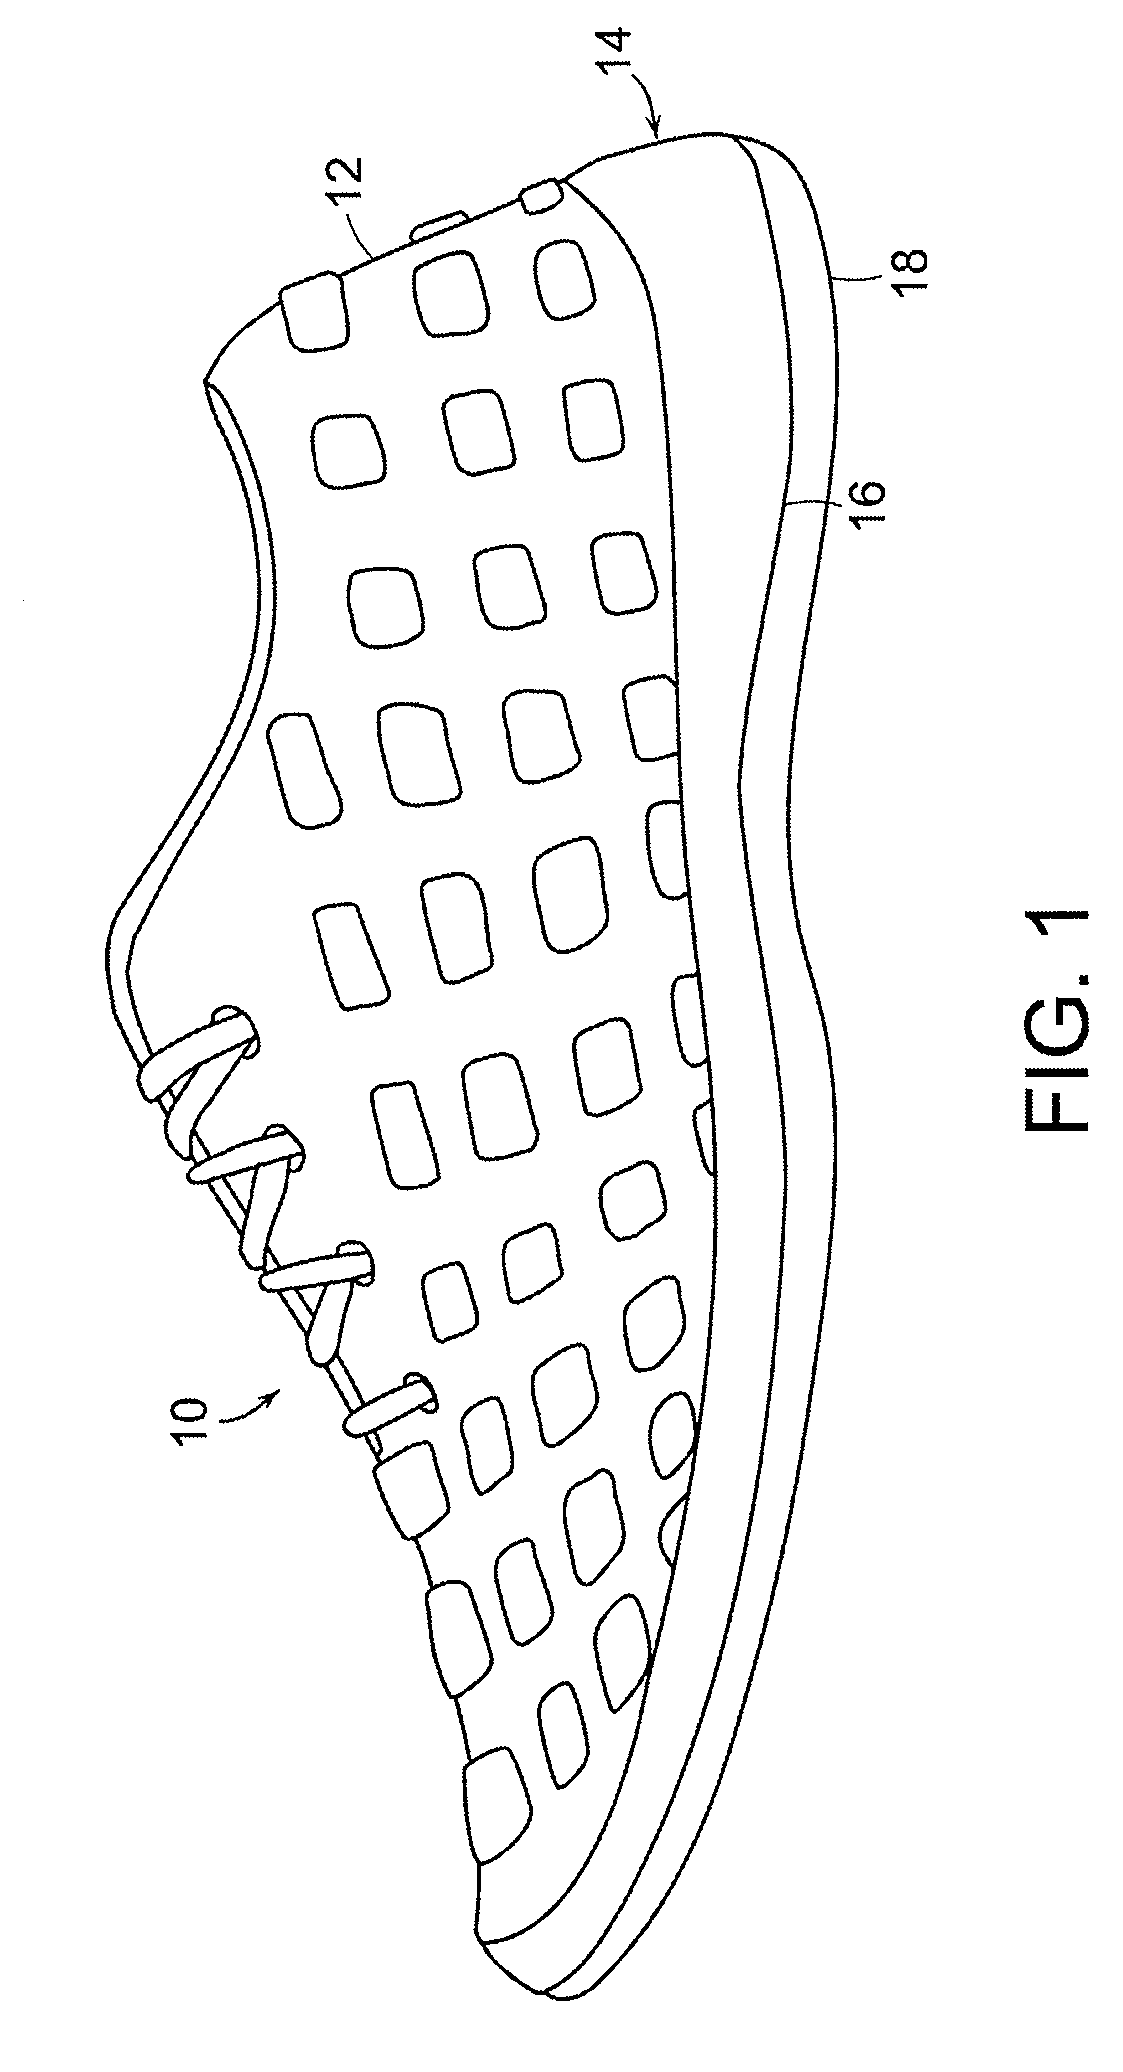 Article of Footwear of Nonwoven Material and Method of Manufacturing Same